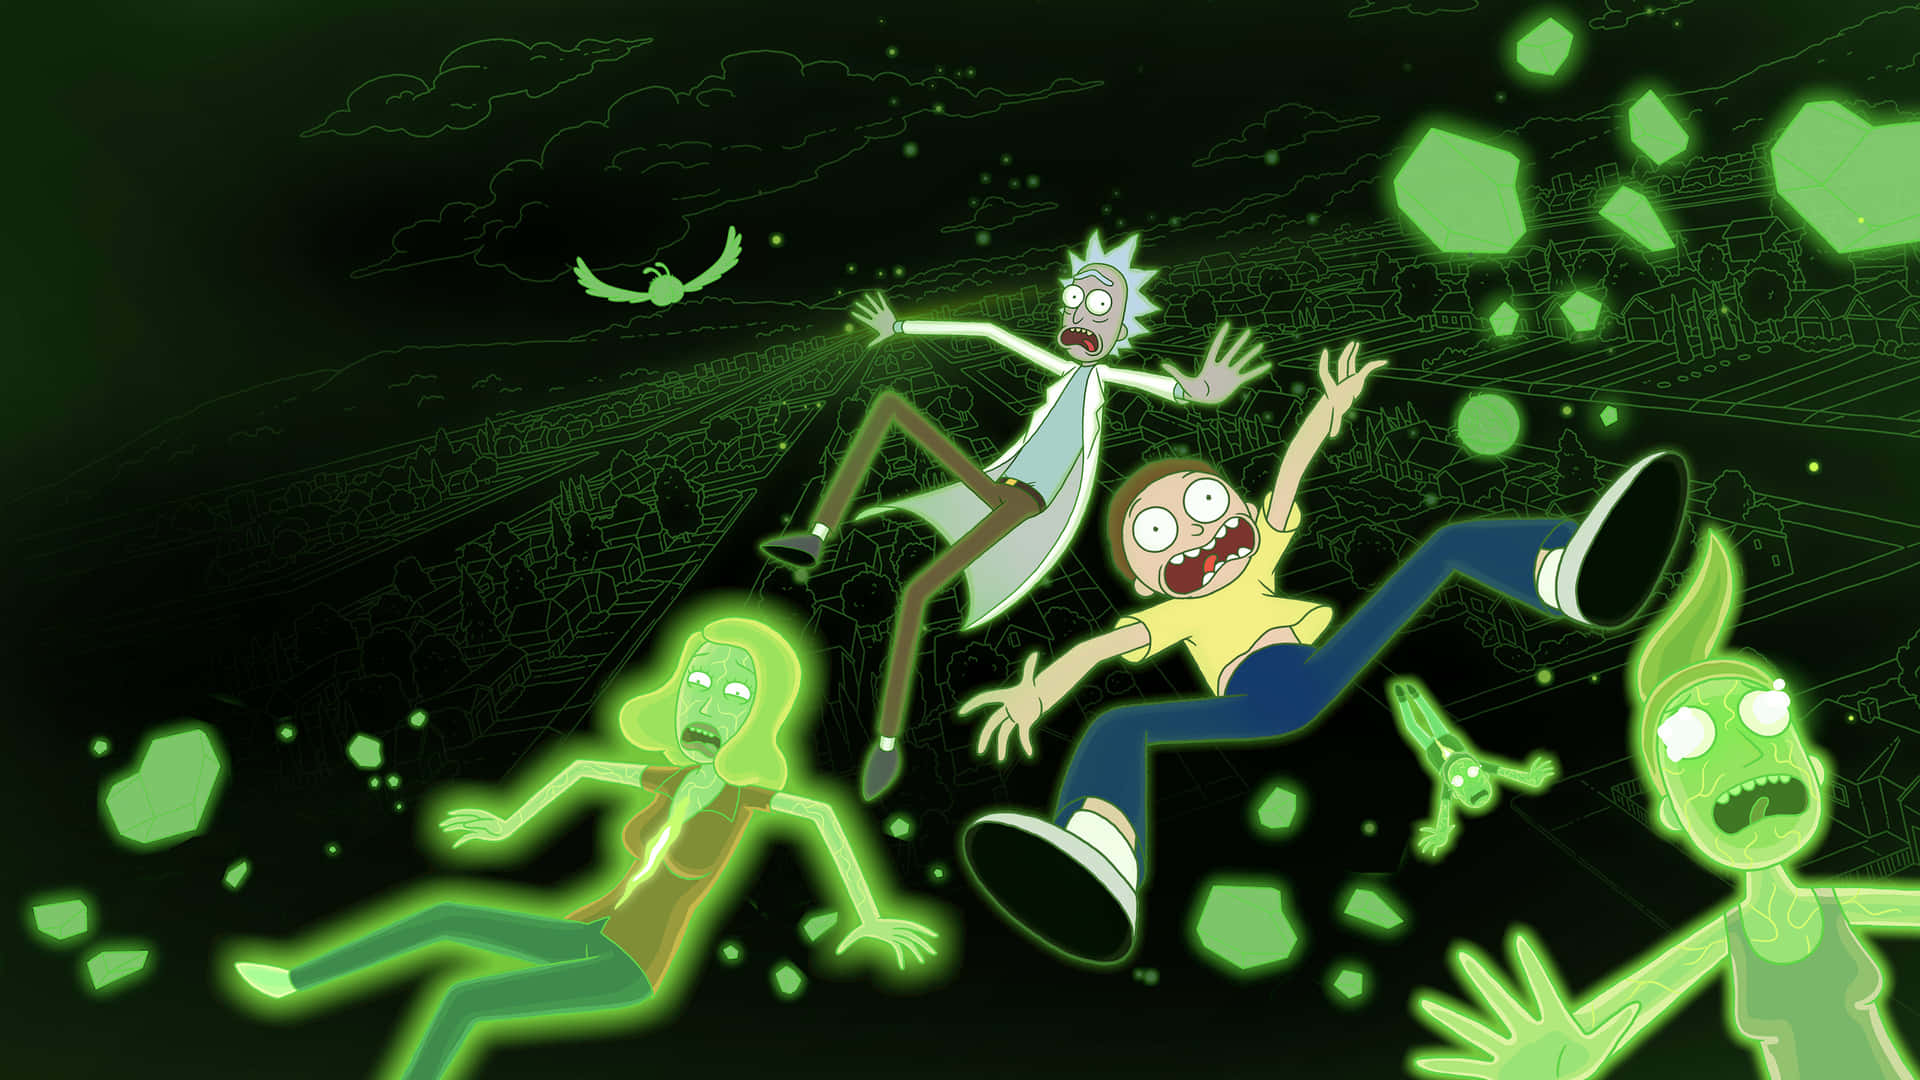 Rick and Morty, breaking the boundaries of science